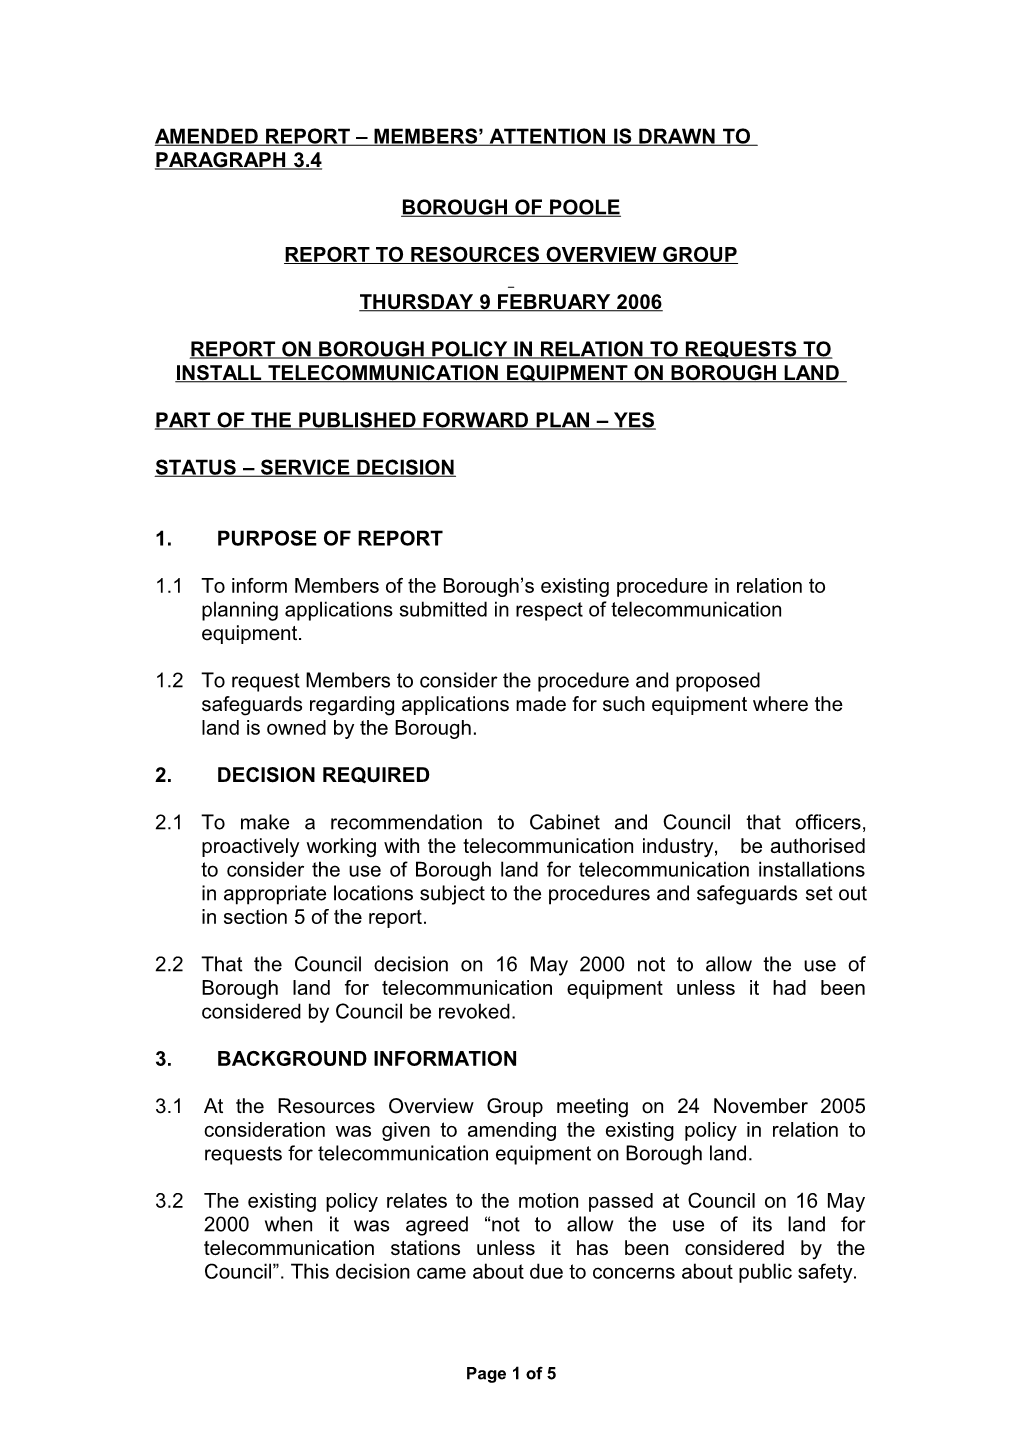 Borough Policy in Relation to Requests to Install Telecommunication Equipment on Borough Land